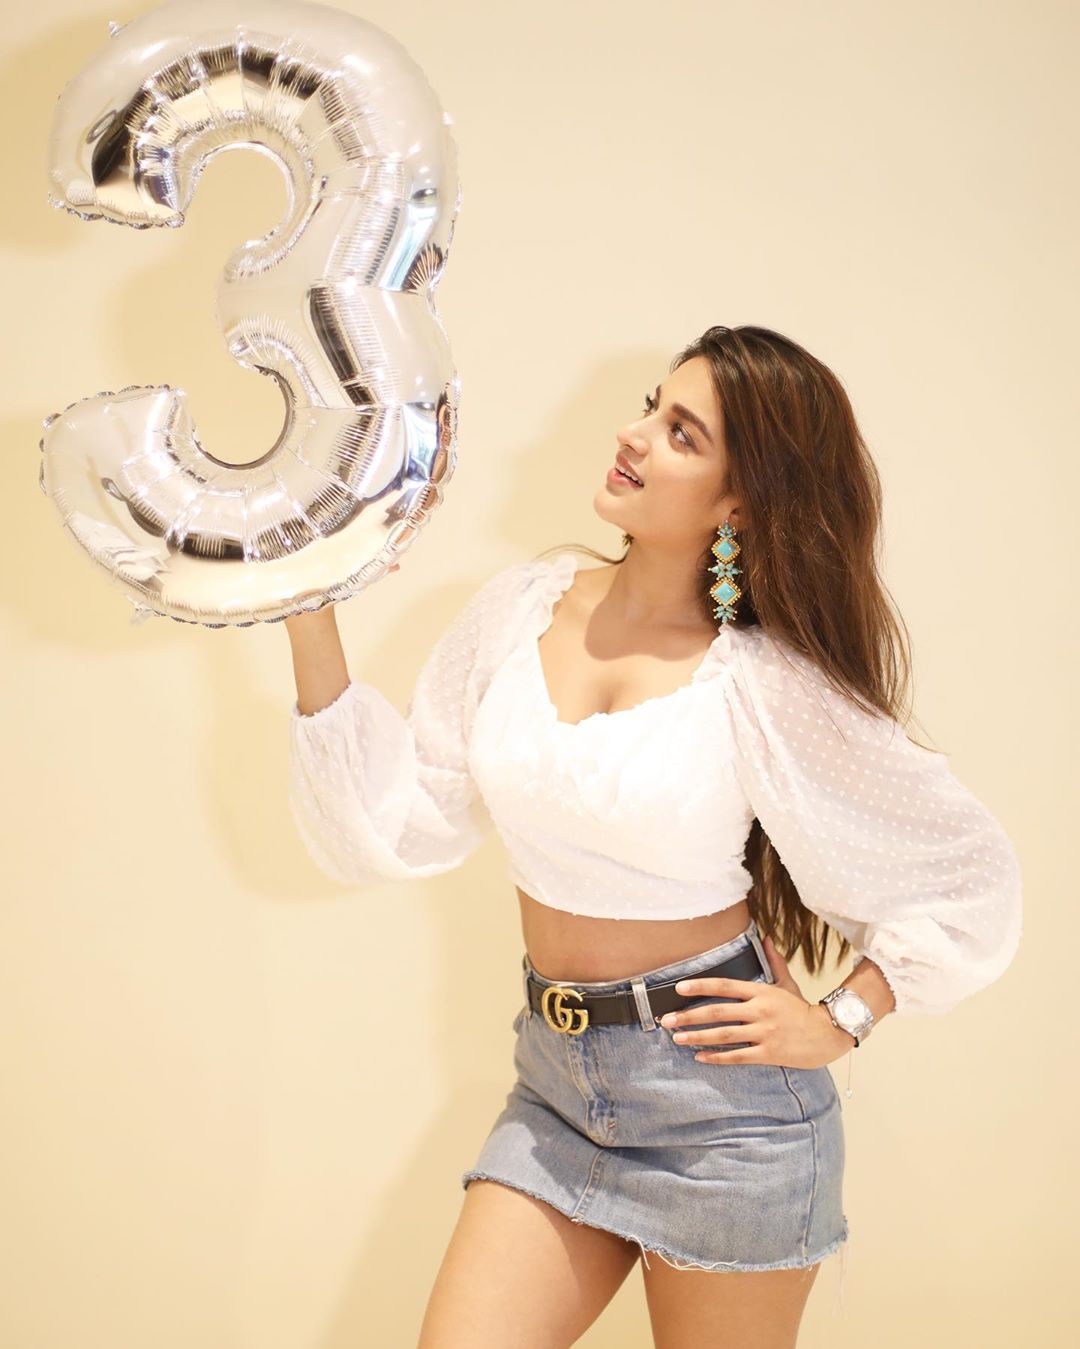 Niddhi Agerwal thanks her fans for 3 Million followers